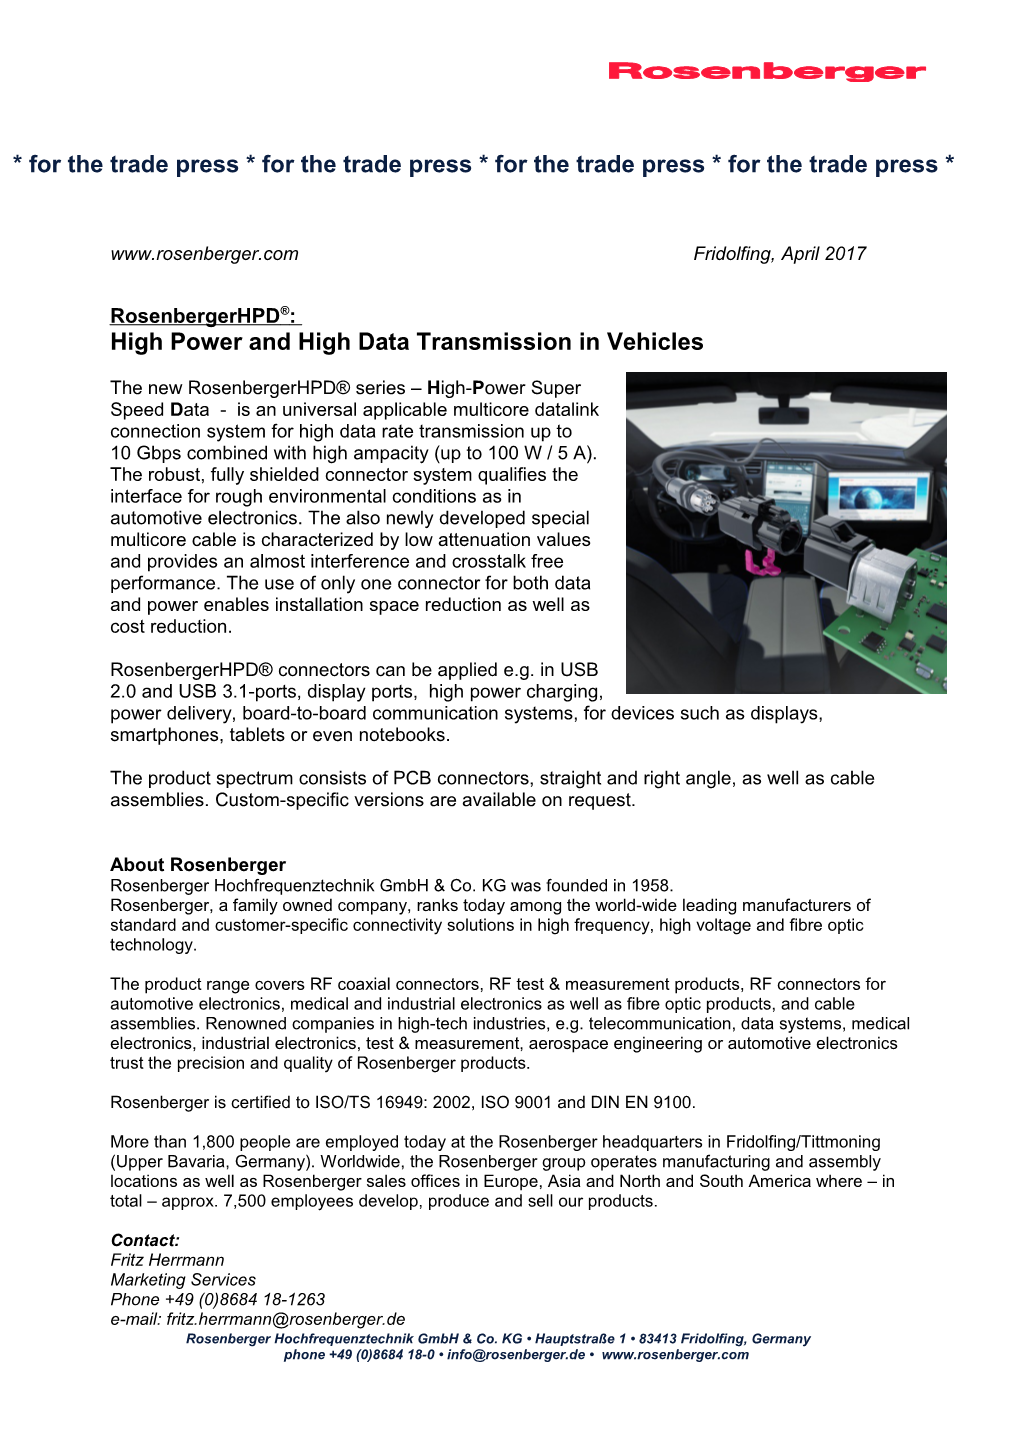 High Power and High Data Transmission in Vehicles